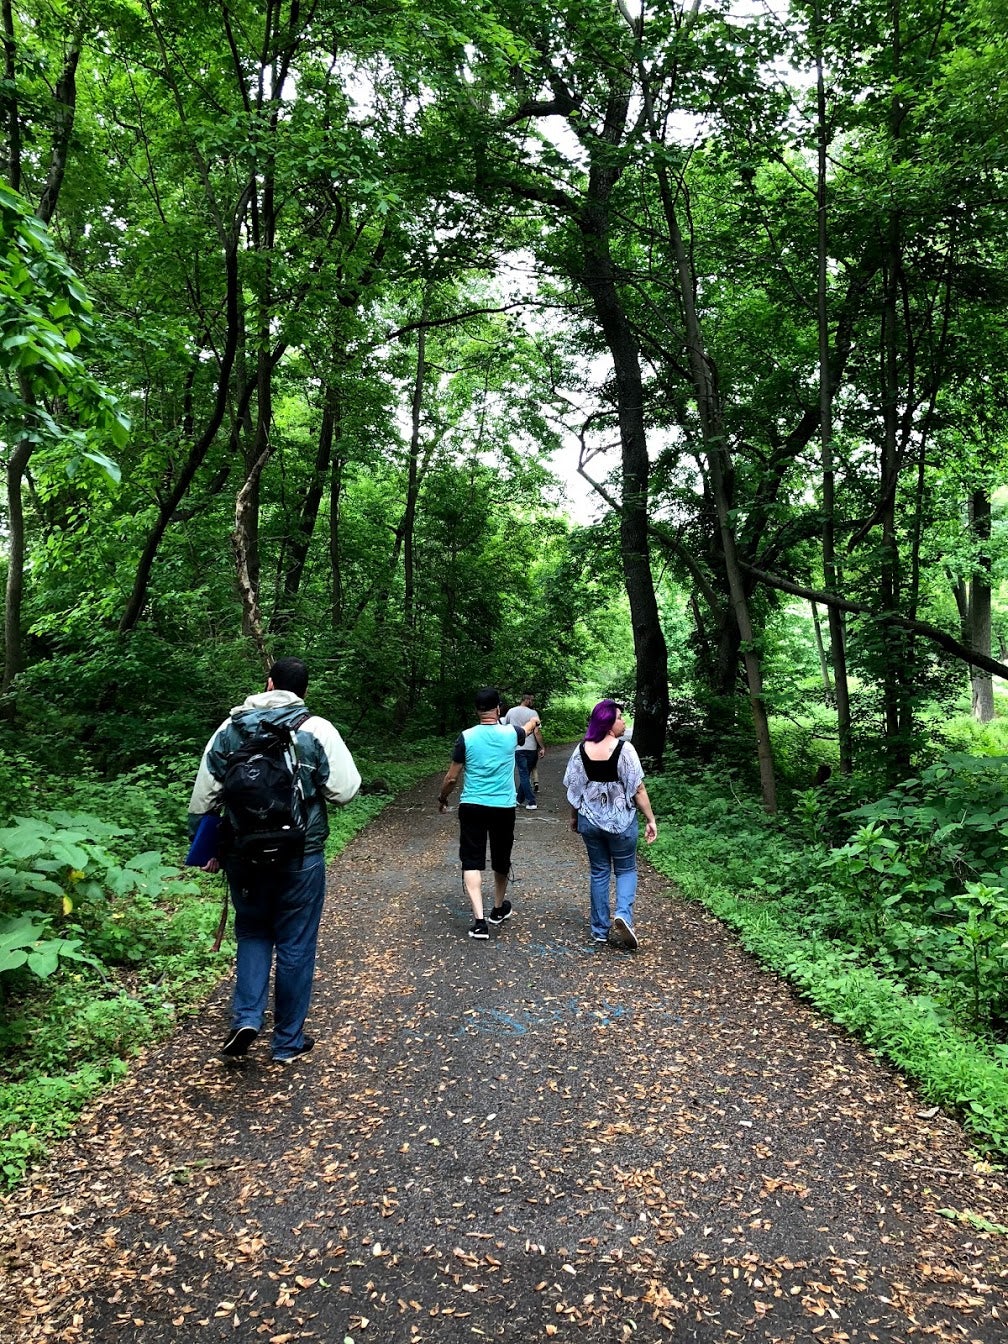 A walk in the park, led by the Tacony Creek Park Keepers. Credit: Diana Lu/WHYY